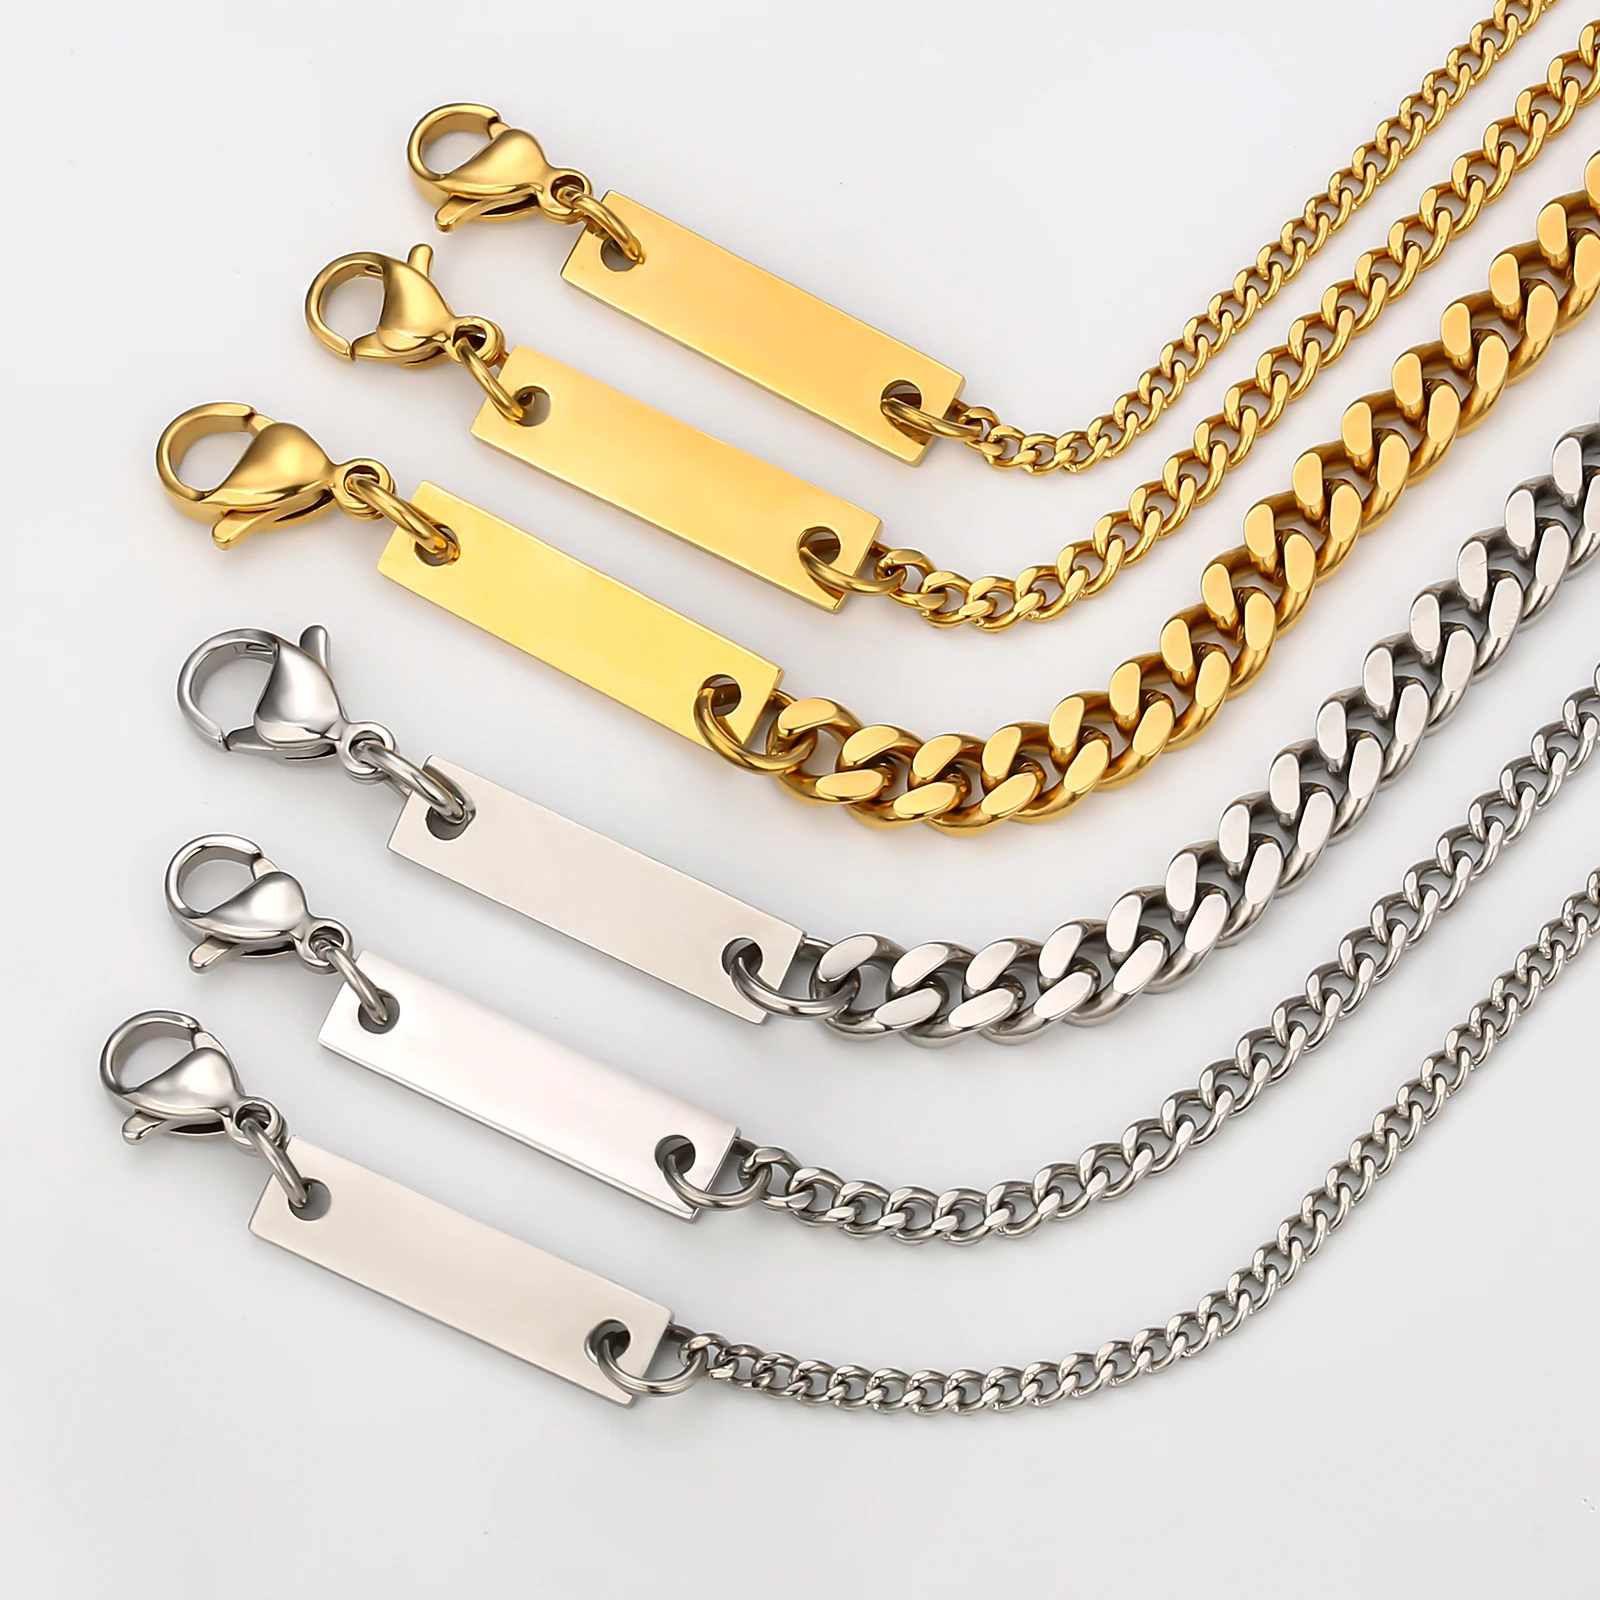 

KRKC Hip Hop Jewelry High Quality cubana Customized Stainless Steel Thin Miami Mens 14k Real Gold Curb Cuban Link Chain Necklace